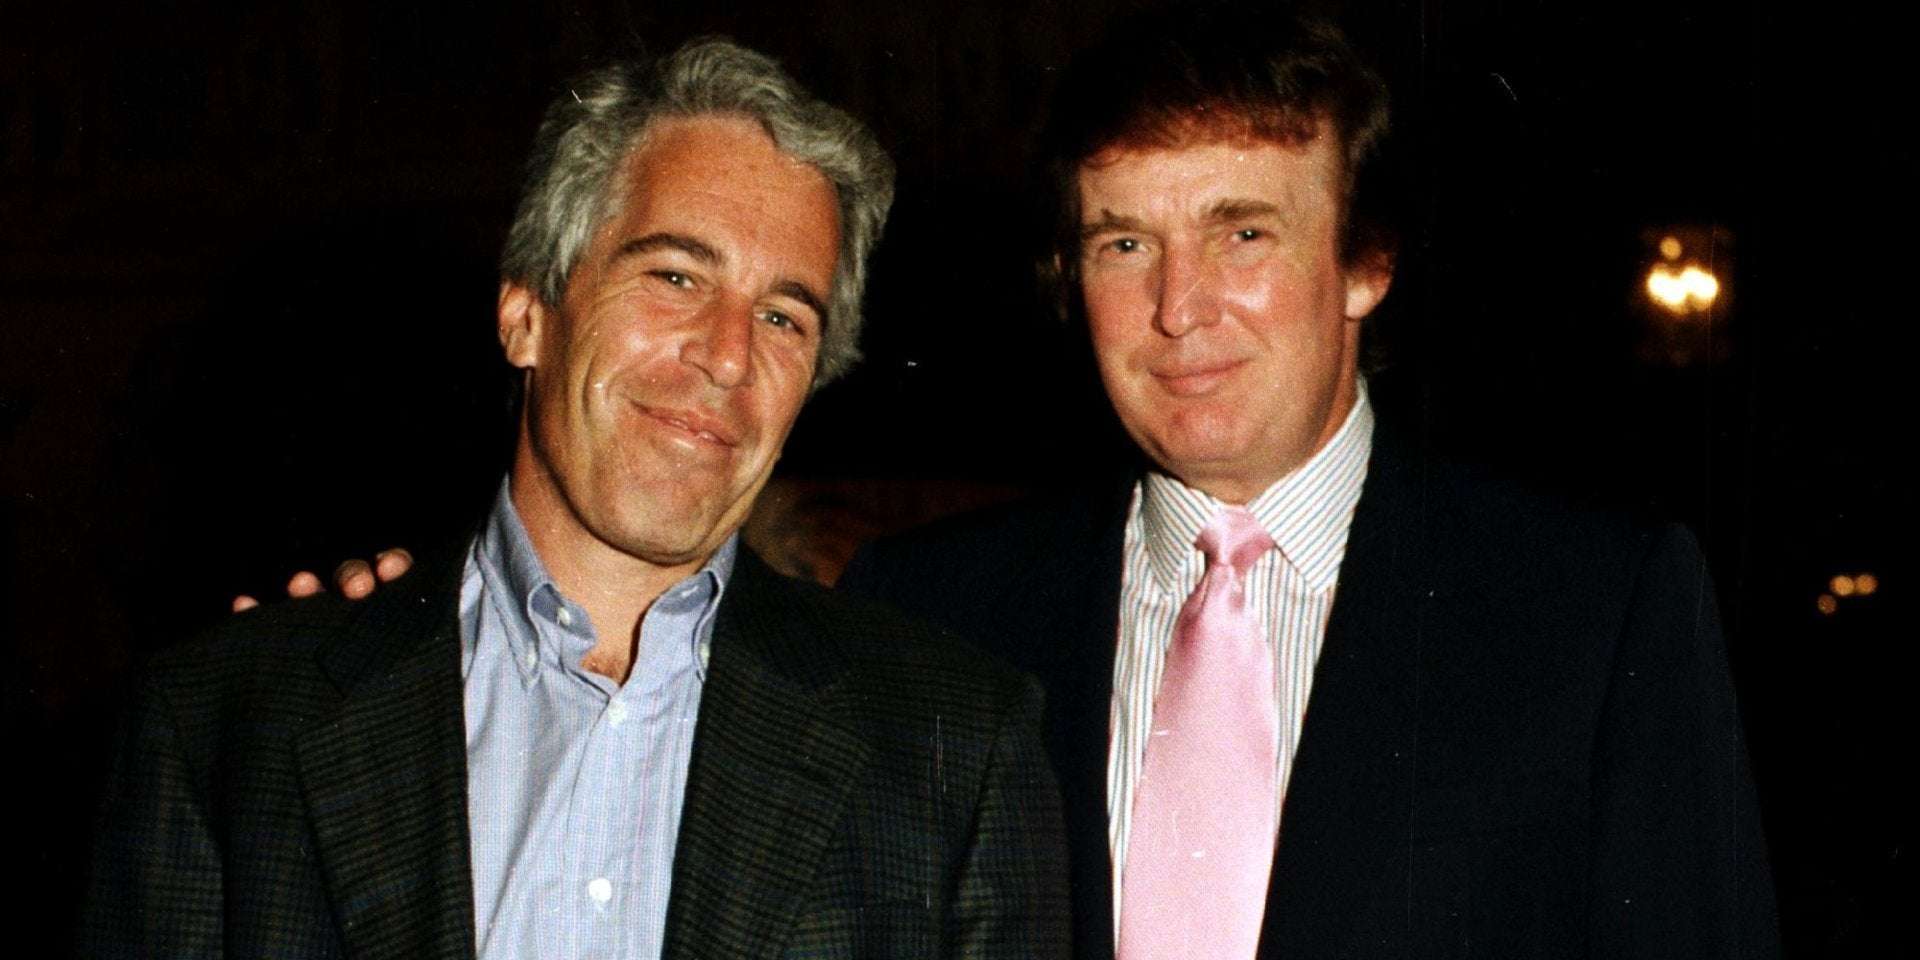 image for Trump hosted an exclusive party with Jeffrey Epstein at his Mar-a-Lago estate, a new report claims. It was just the 2 of them and '28 girls'